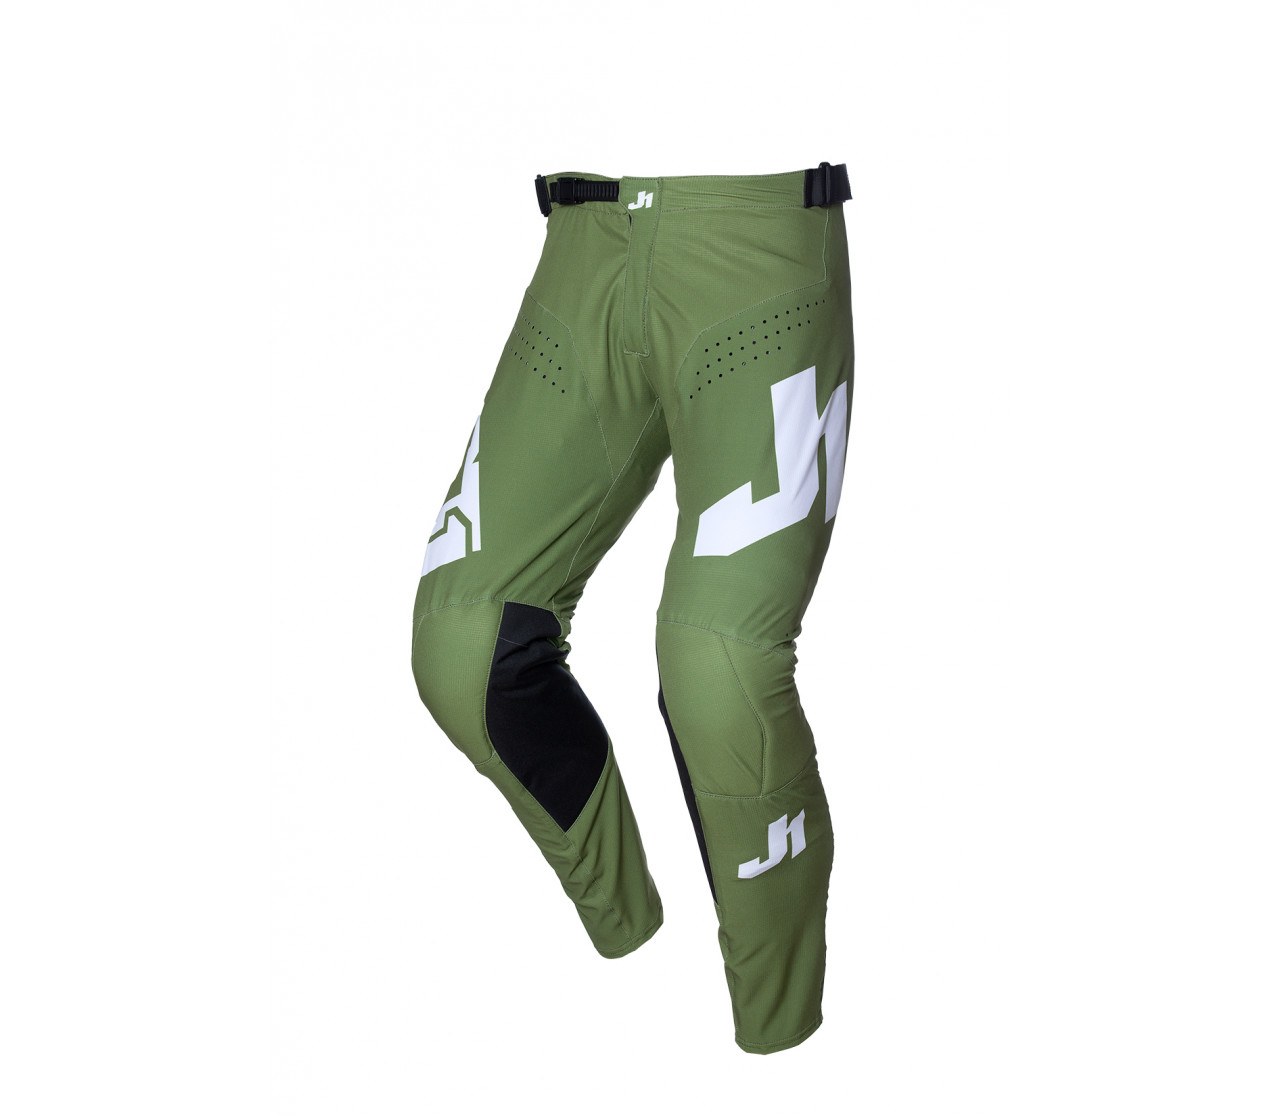 JUST1 PANTS J-ESSENTIAL YOUTH SOLID ARMY BLACK WHITE